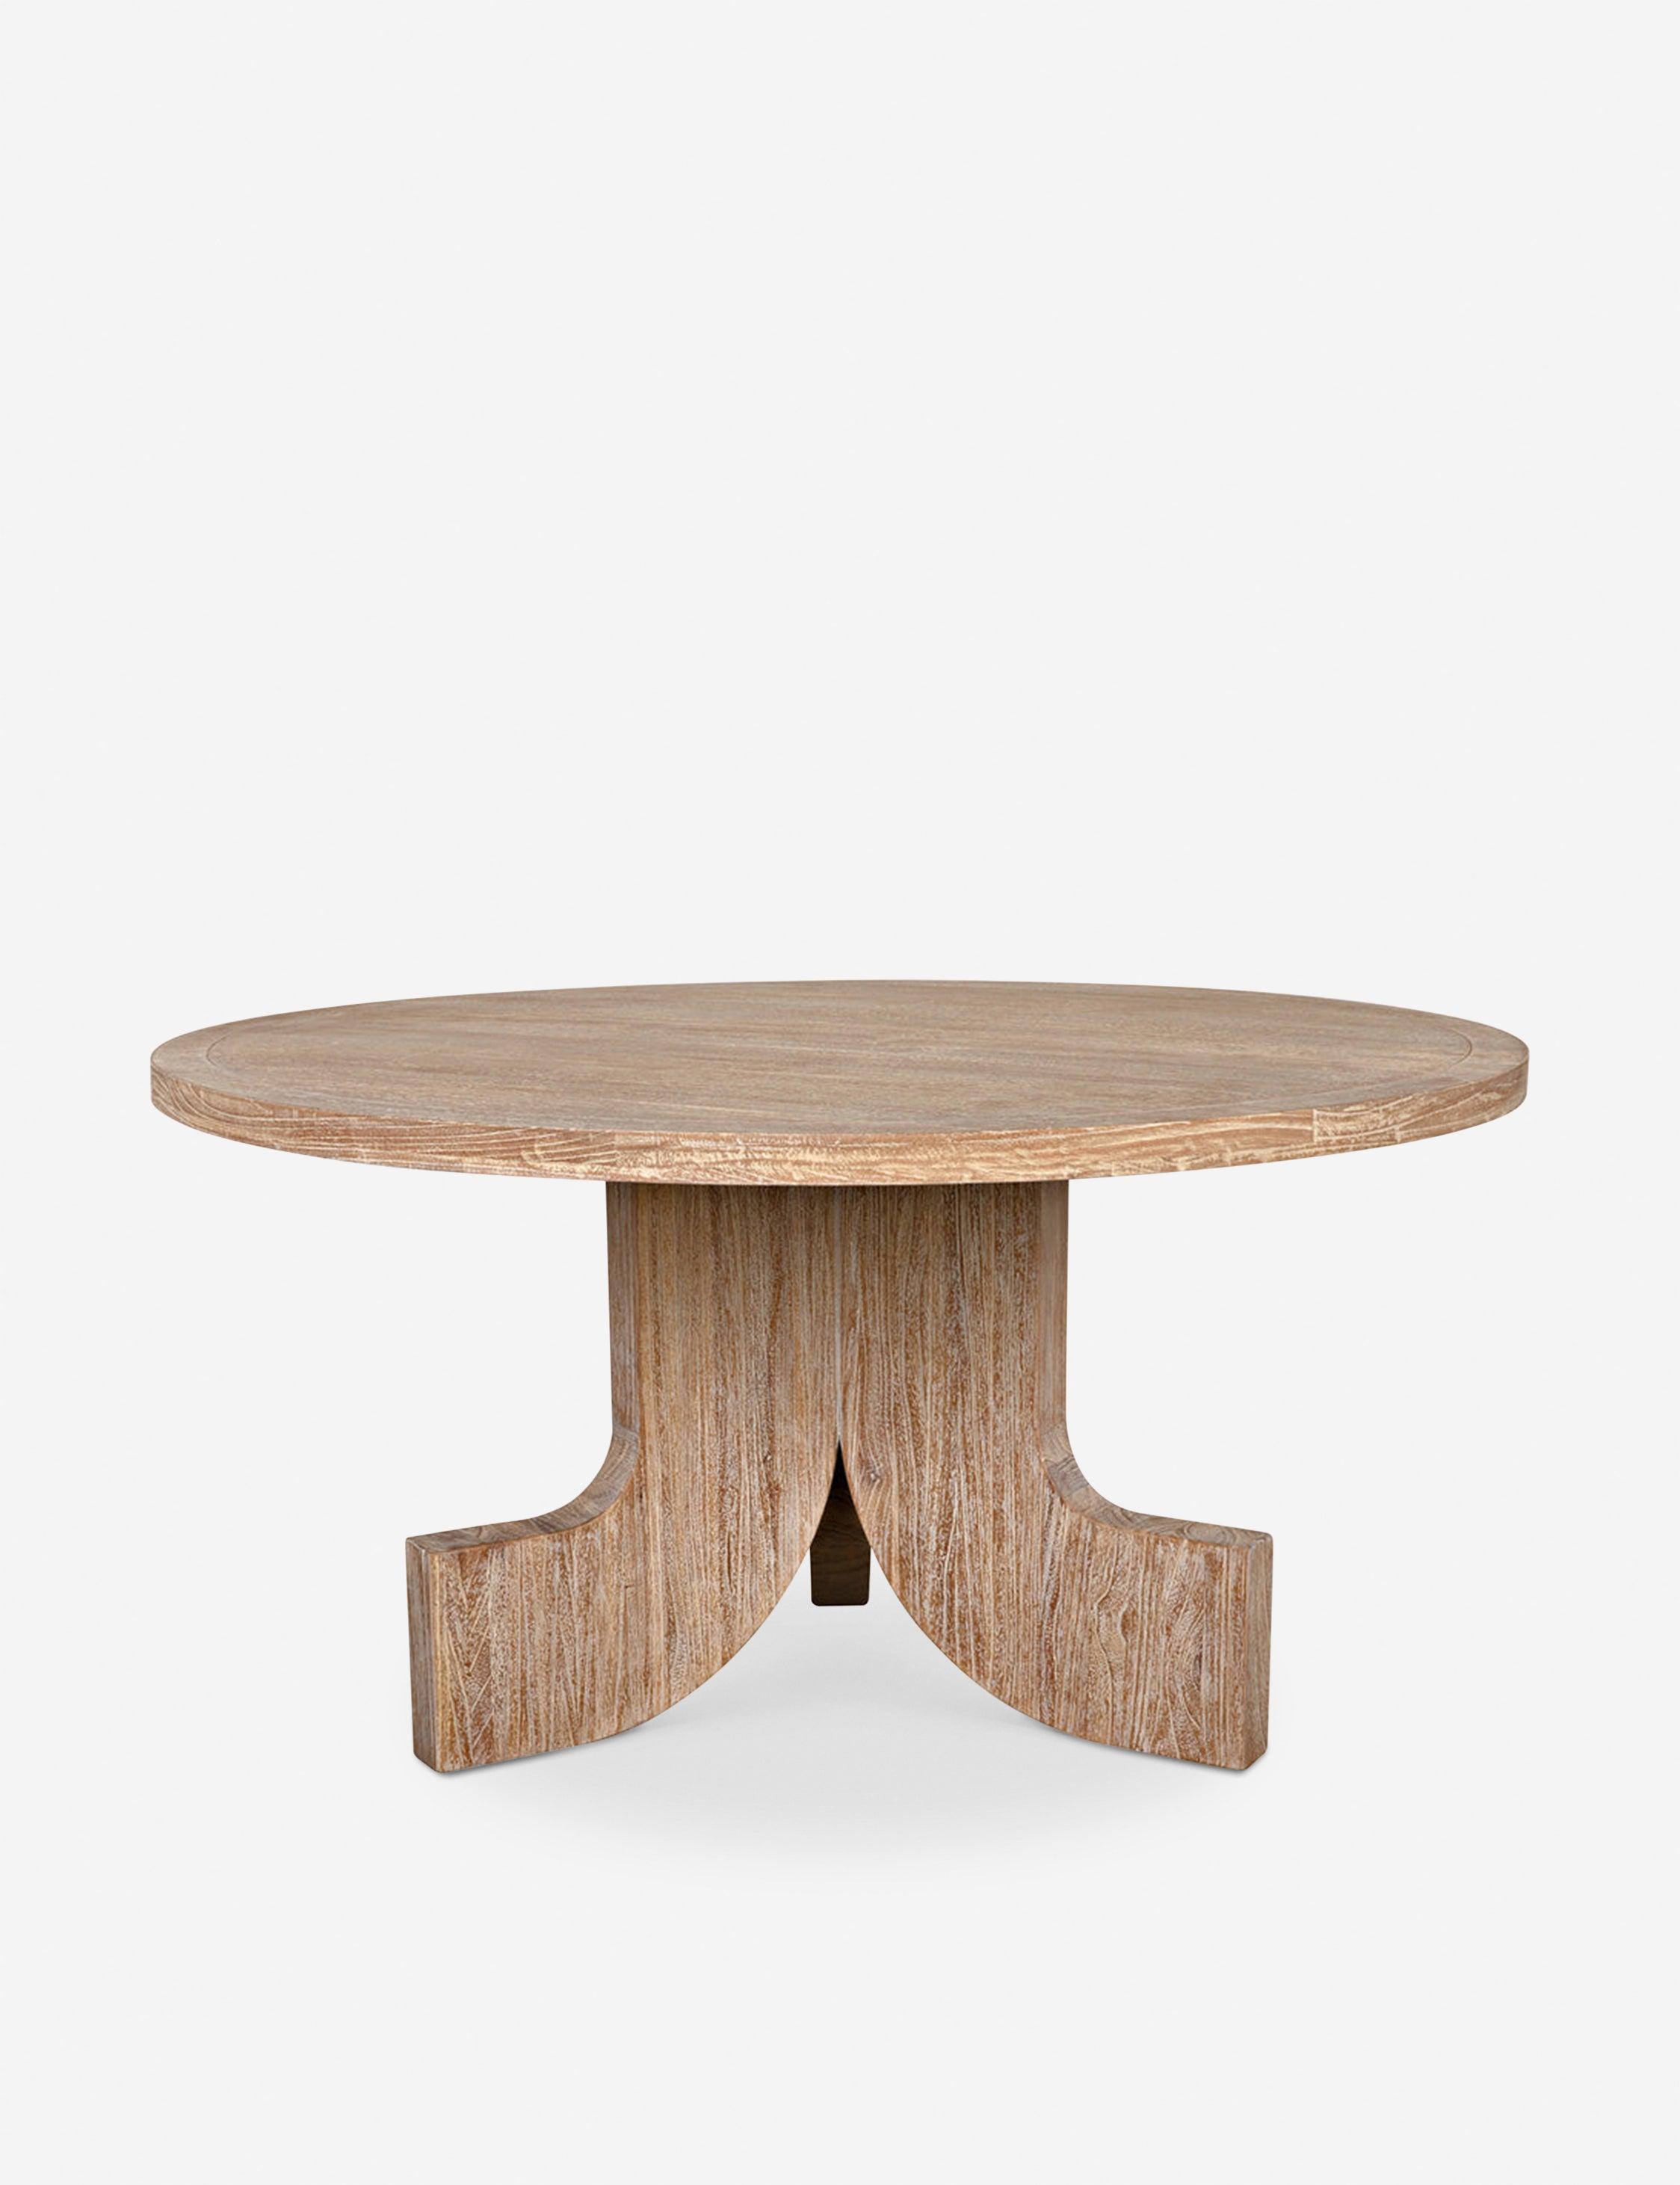 Farmhouse Chic 59" Round Natural Wood Dining Table